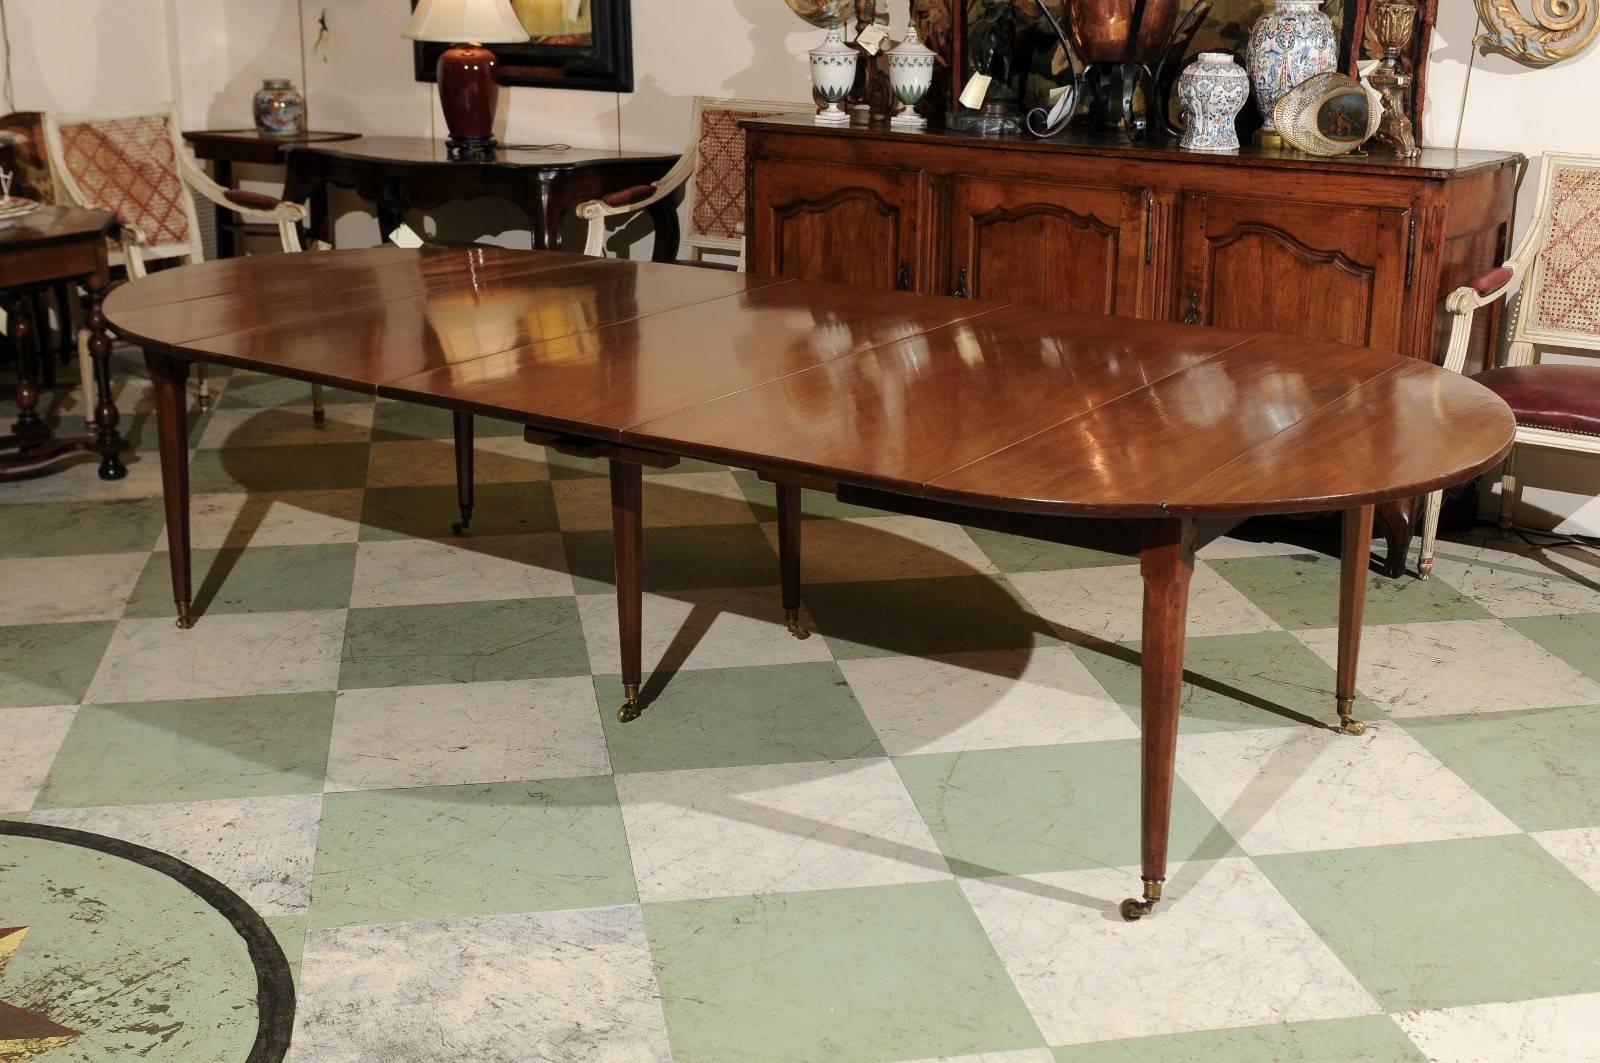 Late 18th century dining in mahogany with three leaves, tapered legs and brass castors. The three leaves were made at later date.

William Word Fine Antiques, Atlanta's source for antique interiors since 1956. 

 